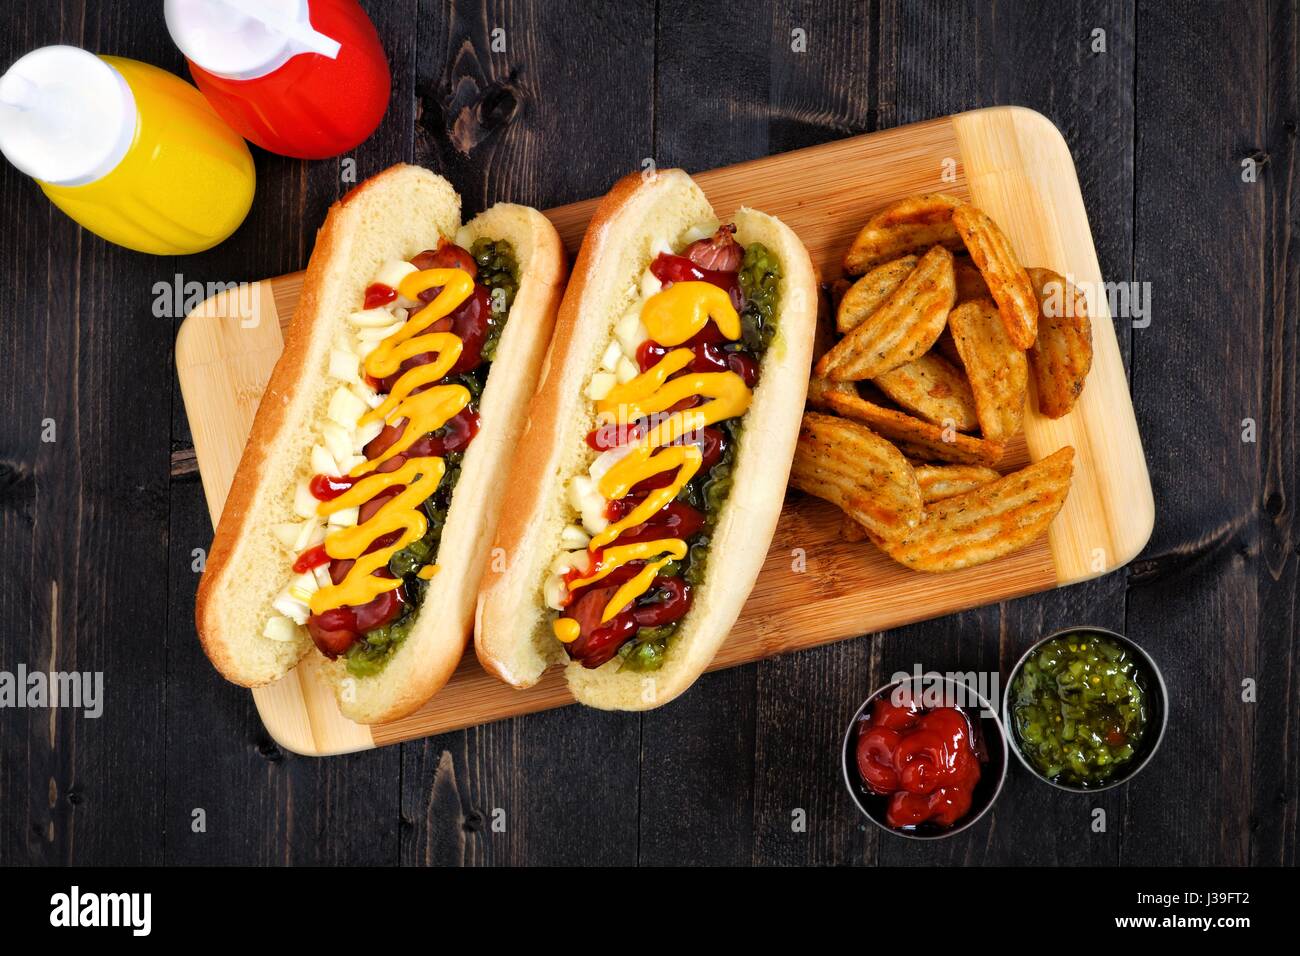 Two hot dogs fully loaded with toppings and potato wedges on wooden board, overhead scene Stock Photo